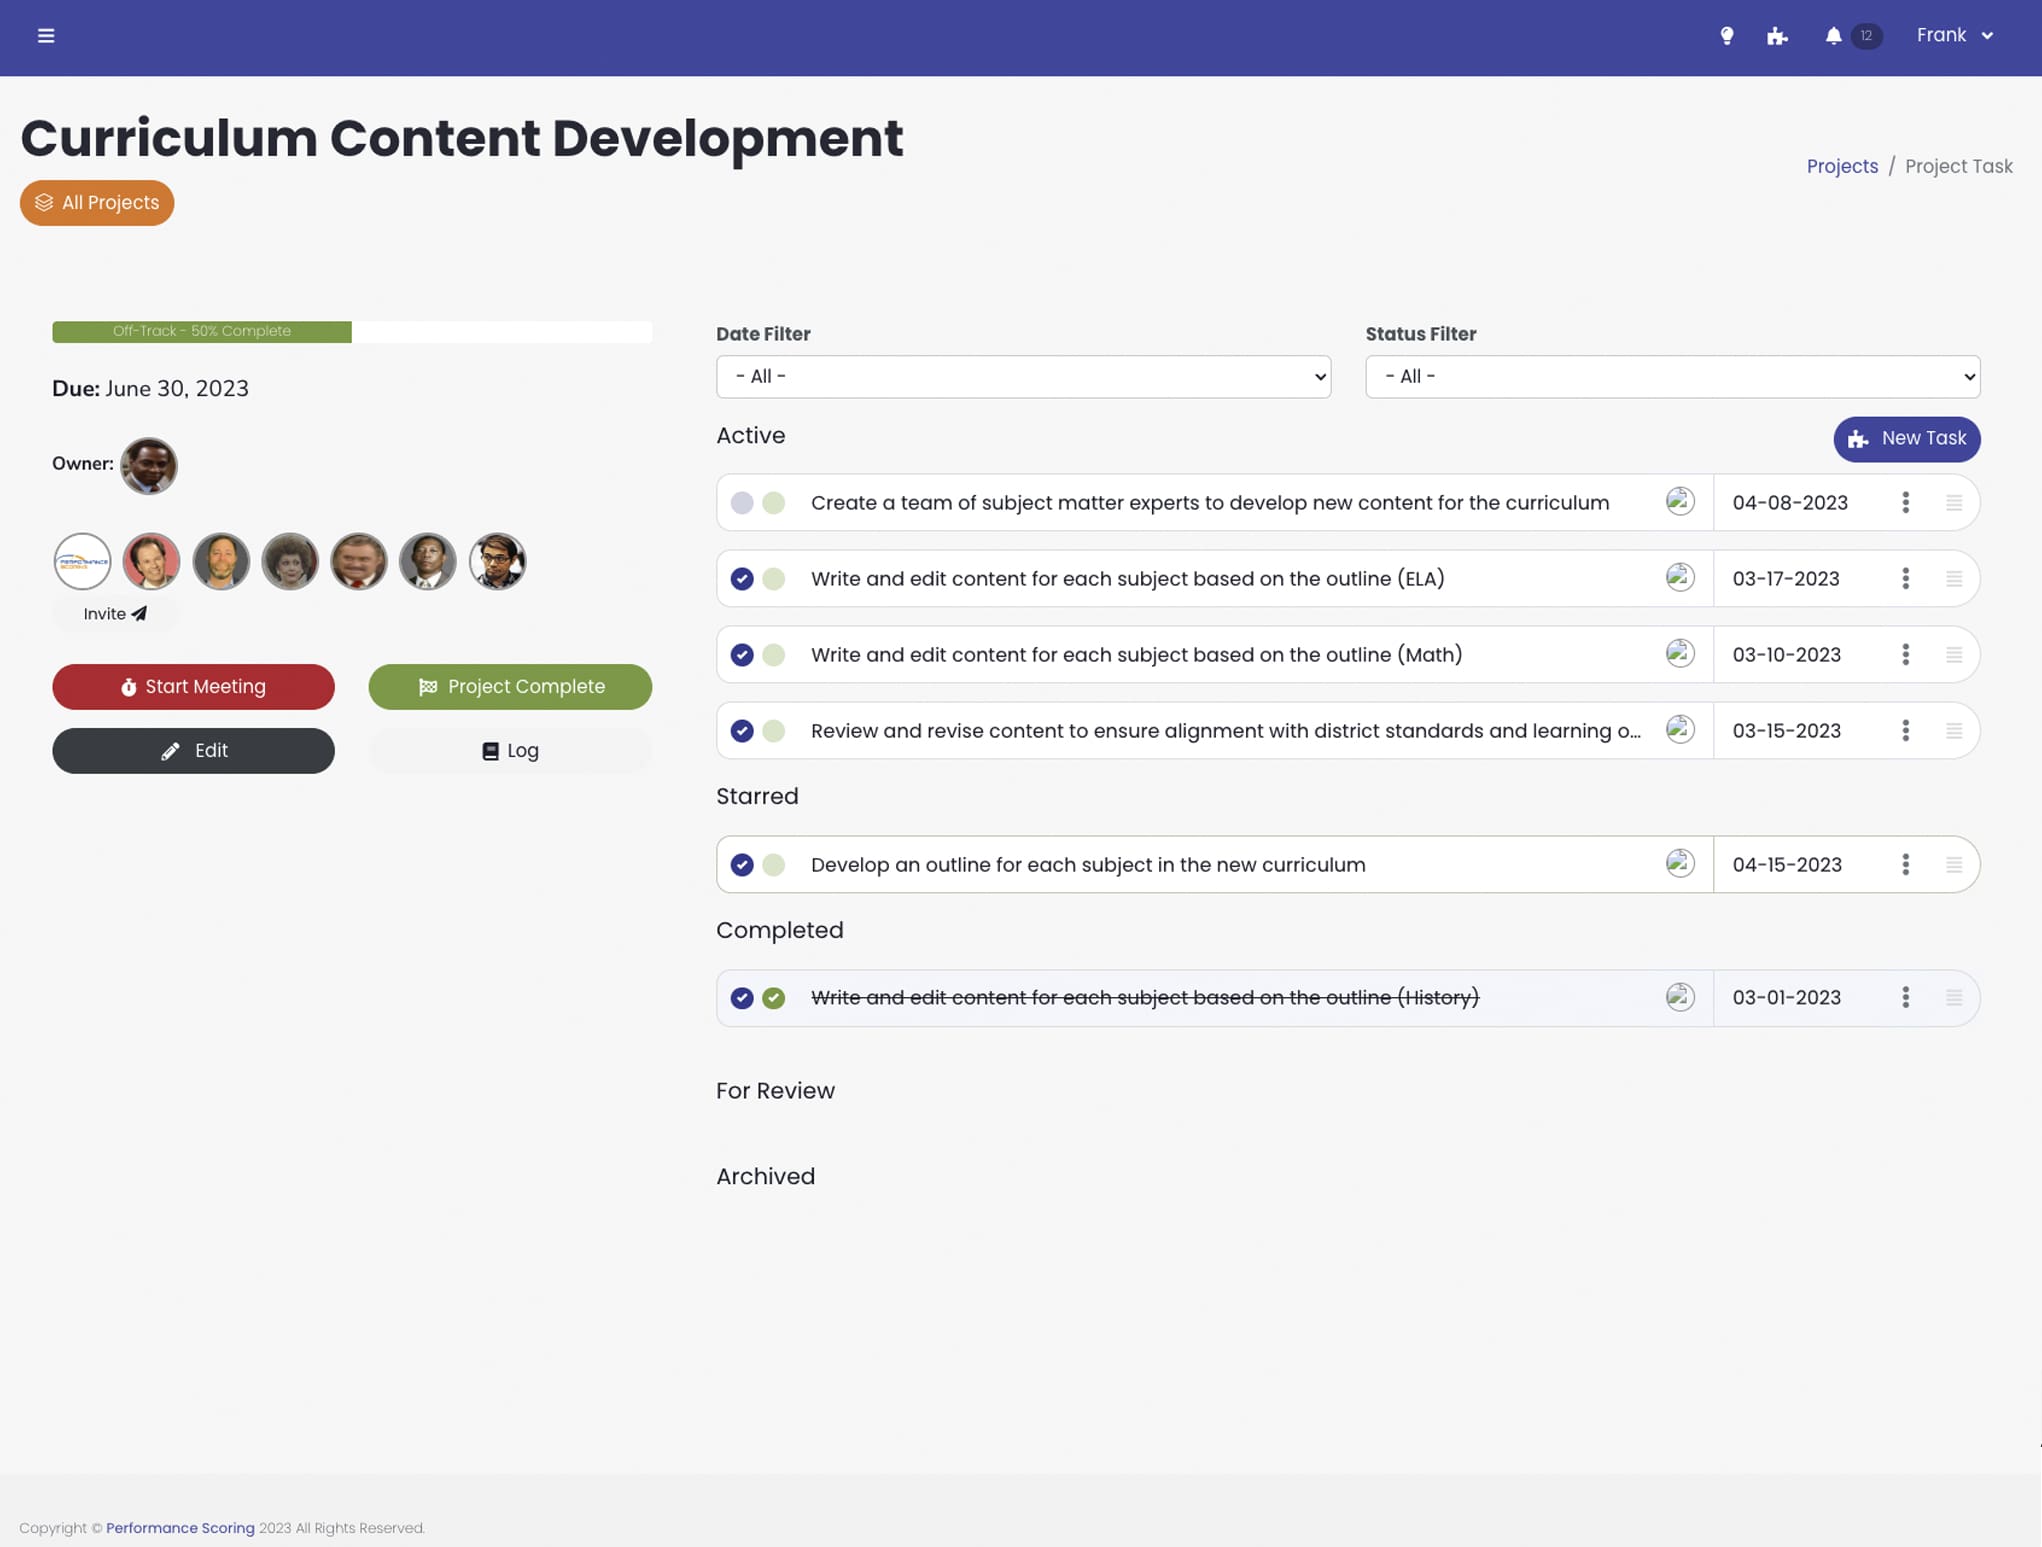 With LoopSpire meetings & engagement tool you can create and manage project workflows, assign tasks, and track progress towards goals.